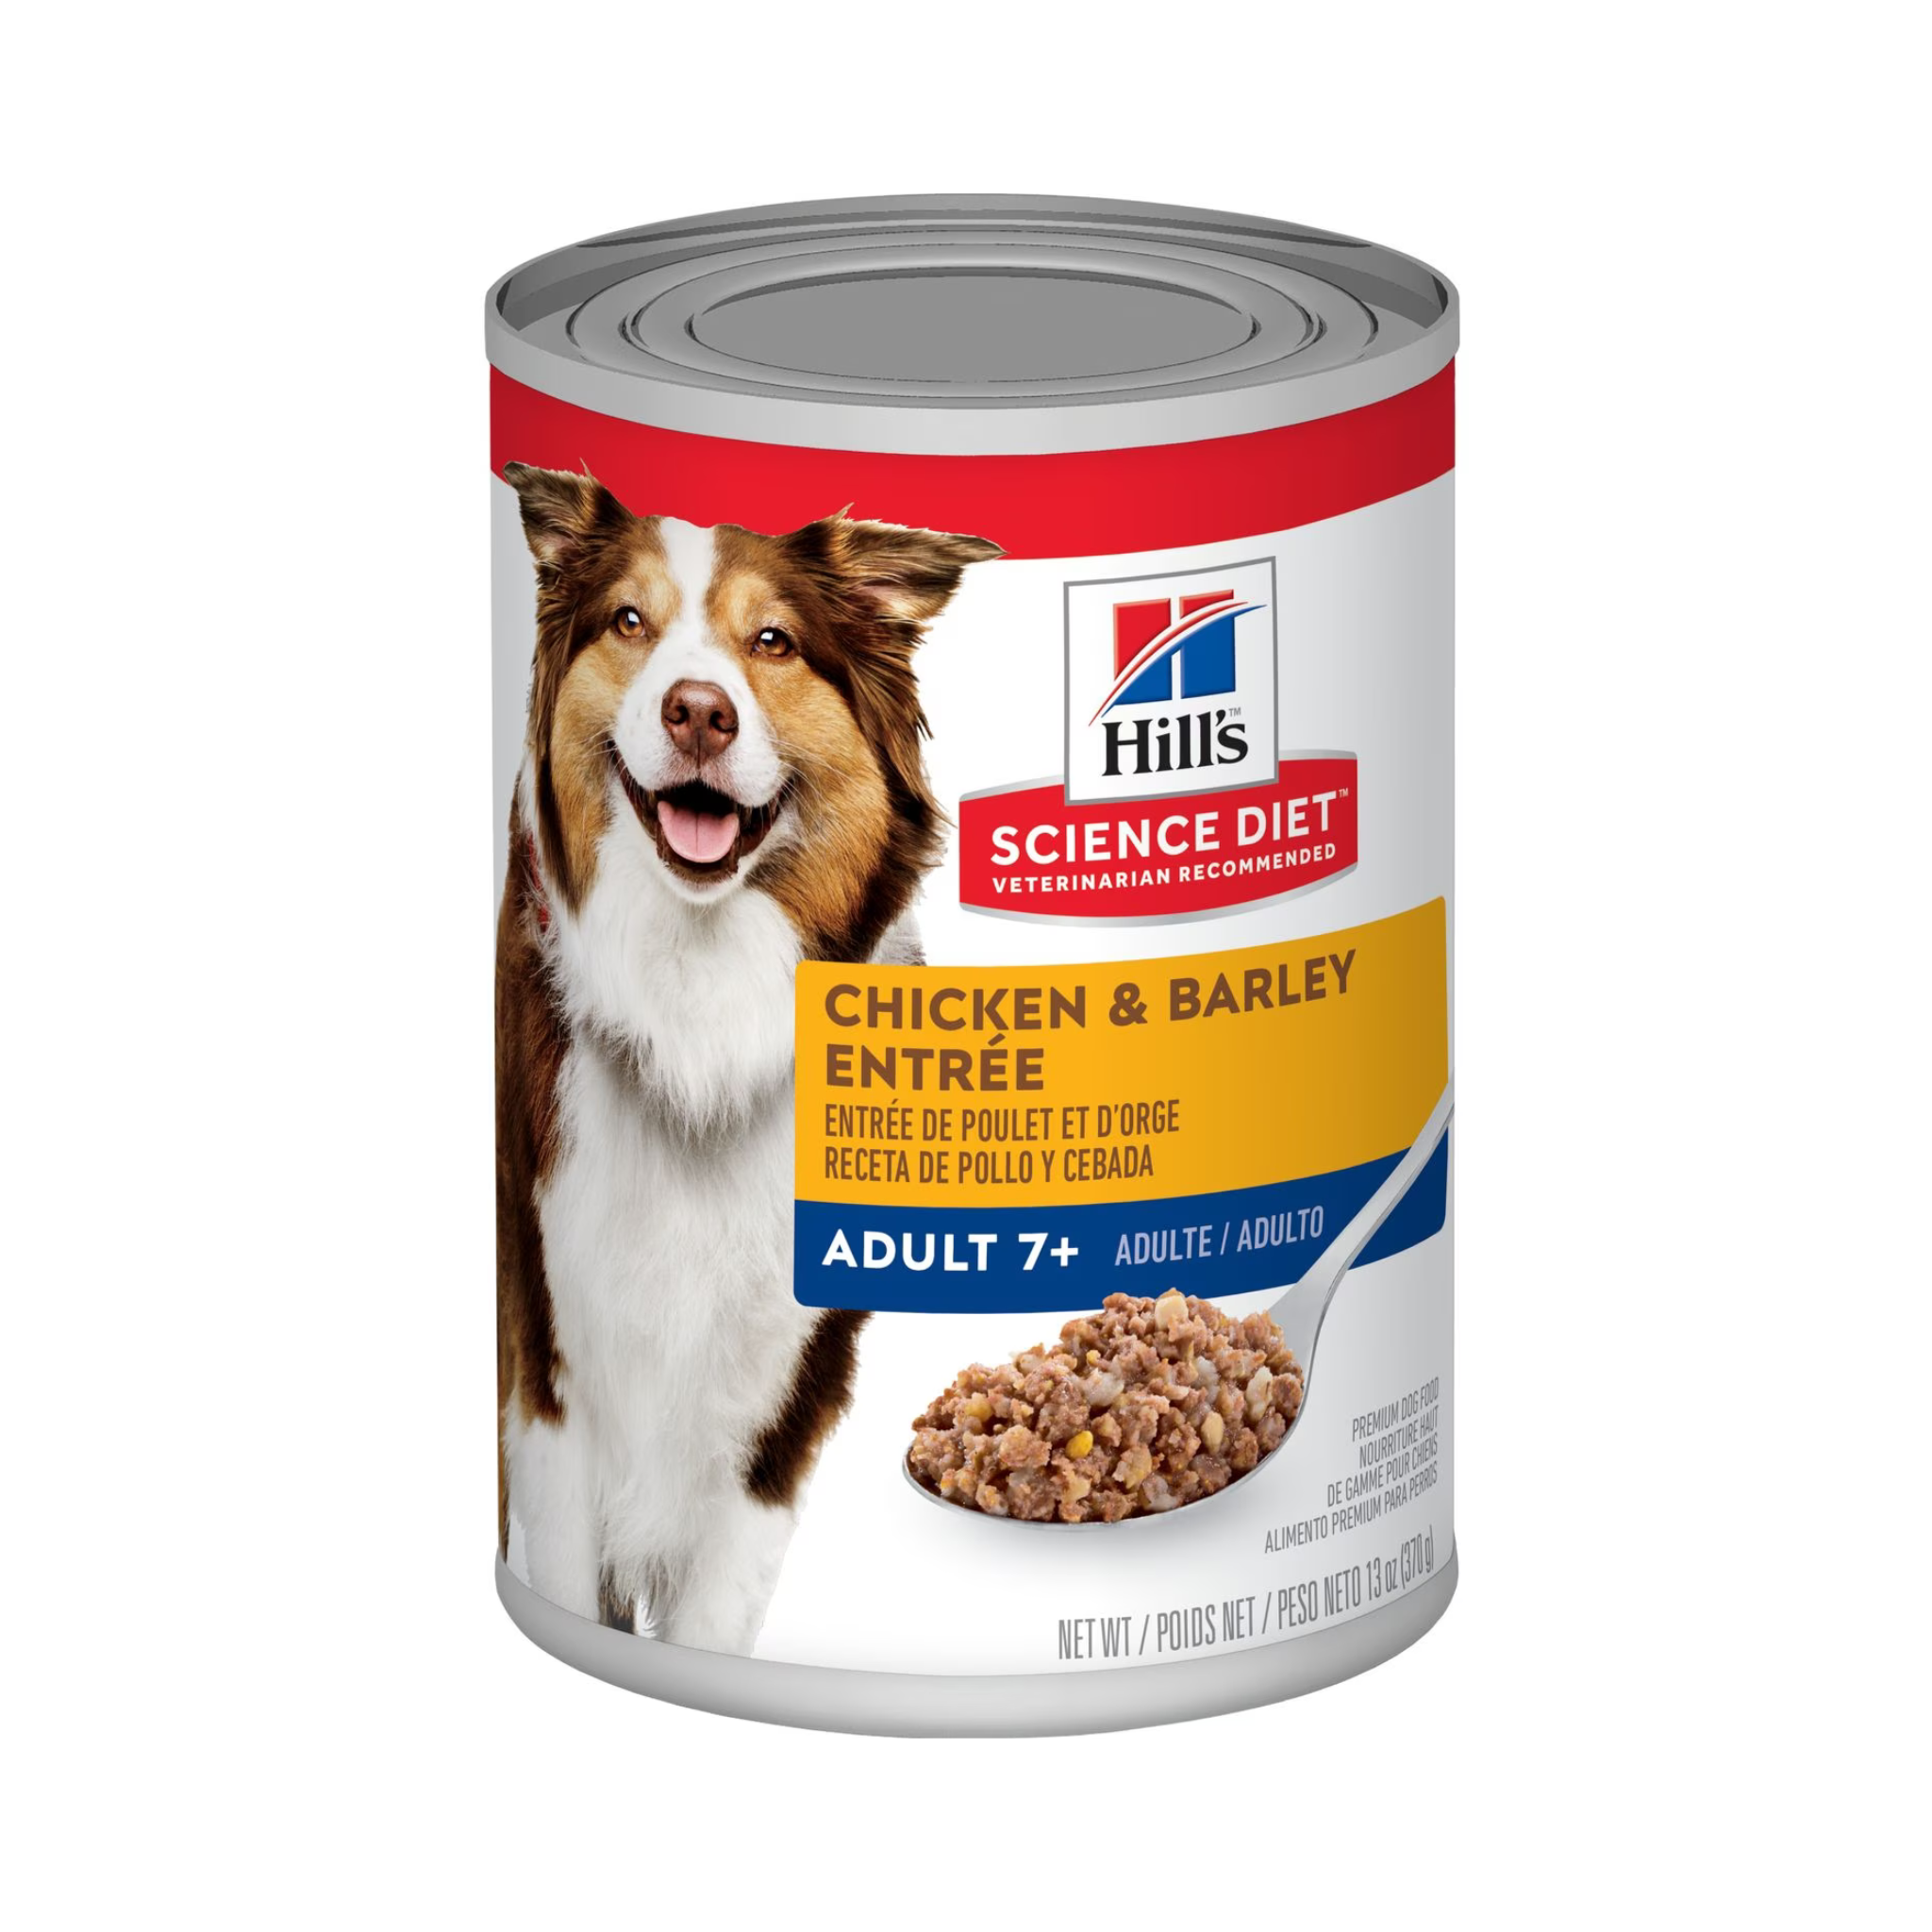 Hill's Science Diet Chicken & Barley Adult 7+ Dog Canned